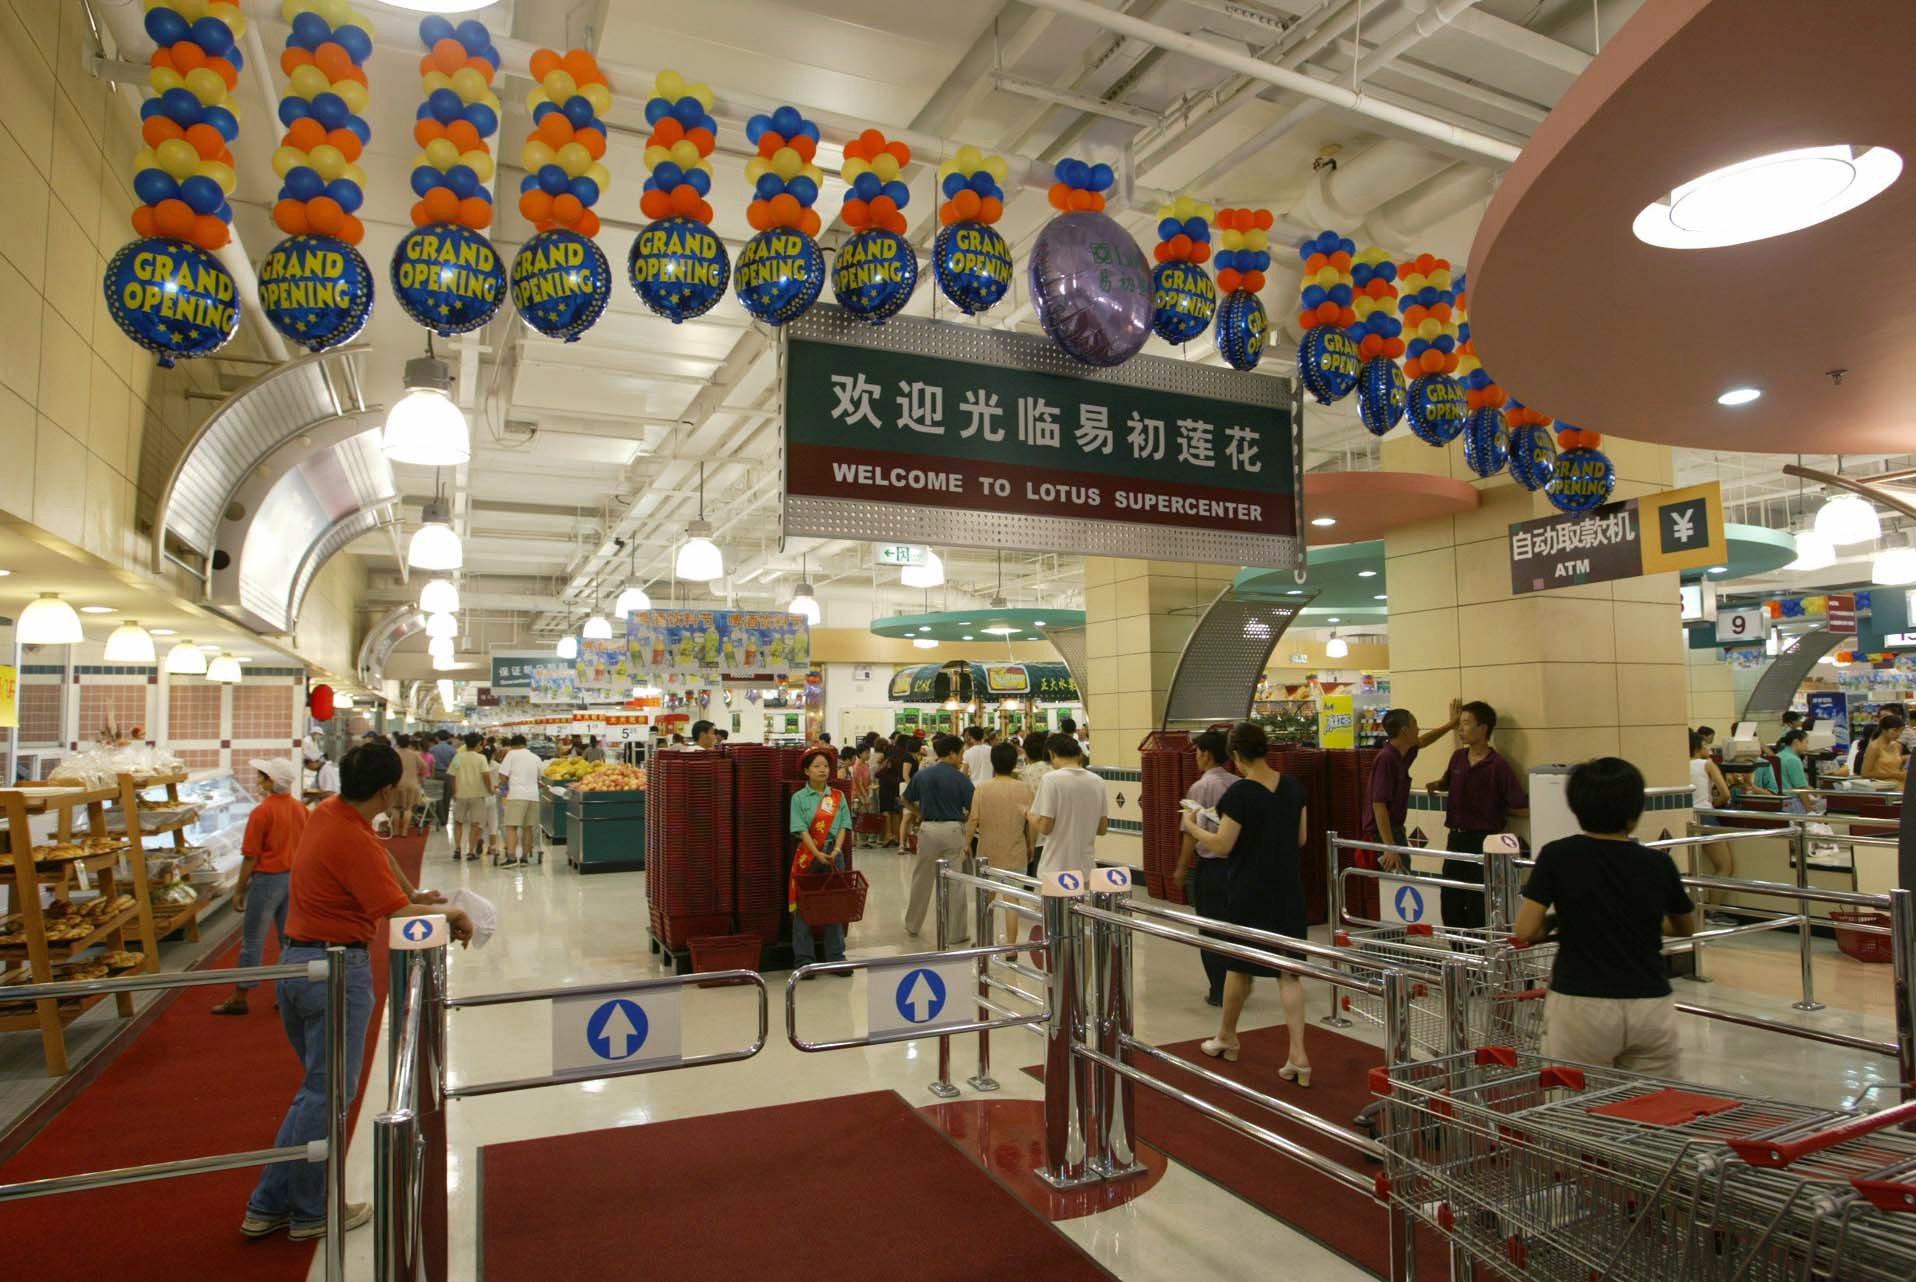 The Lotus Supermarket in the CP Group’s Super Brand Mall at Shanghai’s Lujiazui district on 2 August, 2002. The Chinese name of the supermarket chain is a tribute to the Thai conglomerate’s founder Chia Ek Chor. Photo: Mark Ralston.